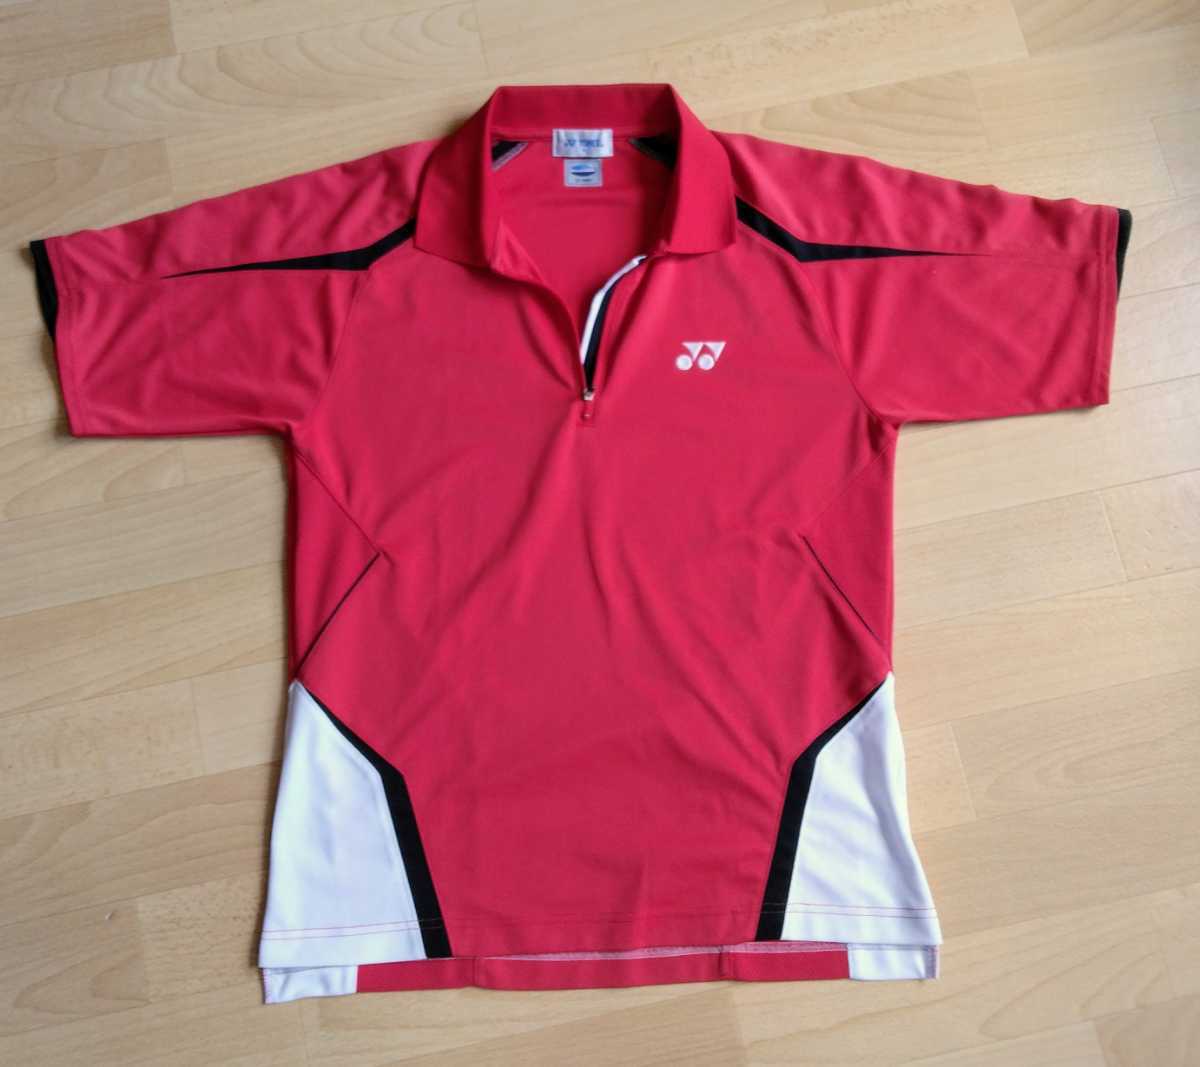 [ used ] tennis badminton game shirt wear top and bottom M size on Yonex under Uniqlo .. packet 210 jpy 